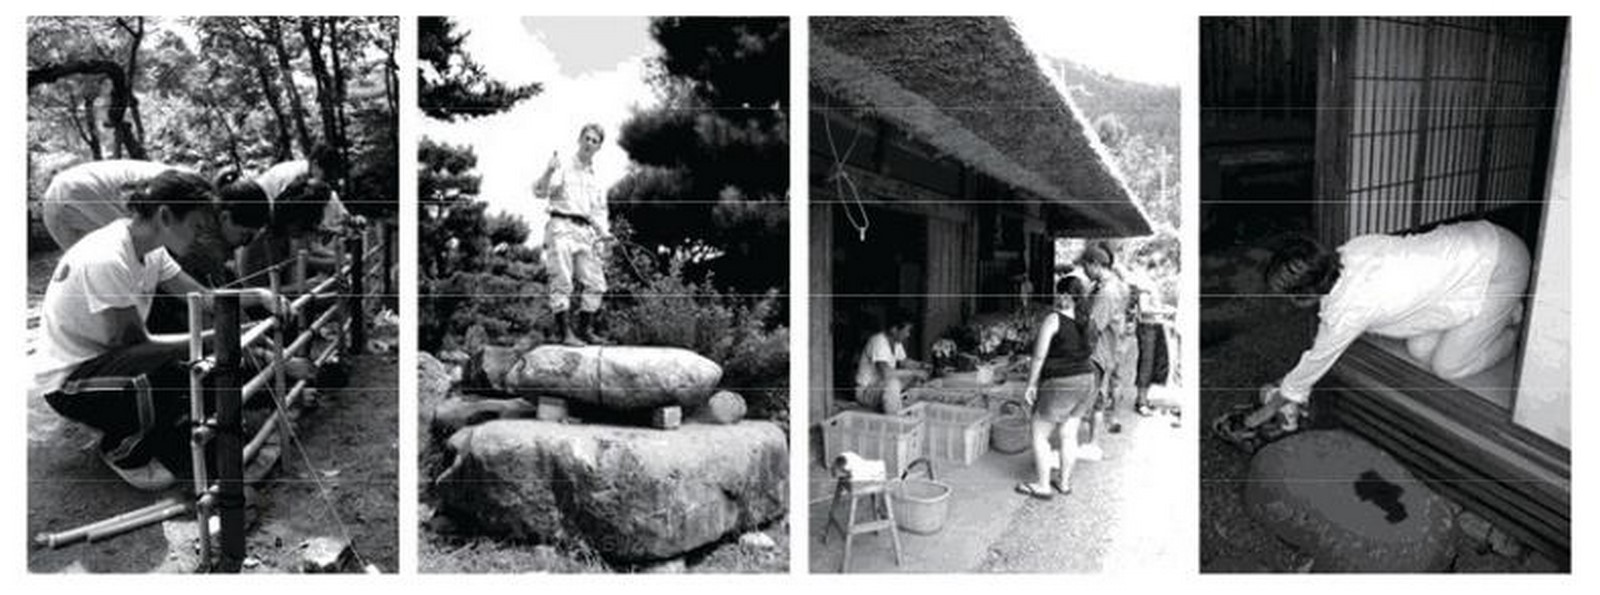  Article in Focus: Cross Cultural Education in Architecture: Findings from Teaching International Students Traditional Japanese Architecture and Gardens by Suzuki, Arno - Sheet3